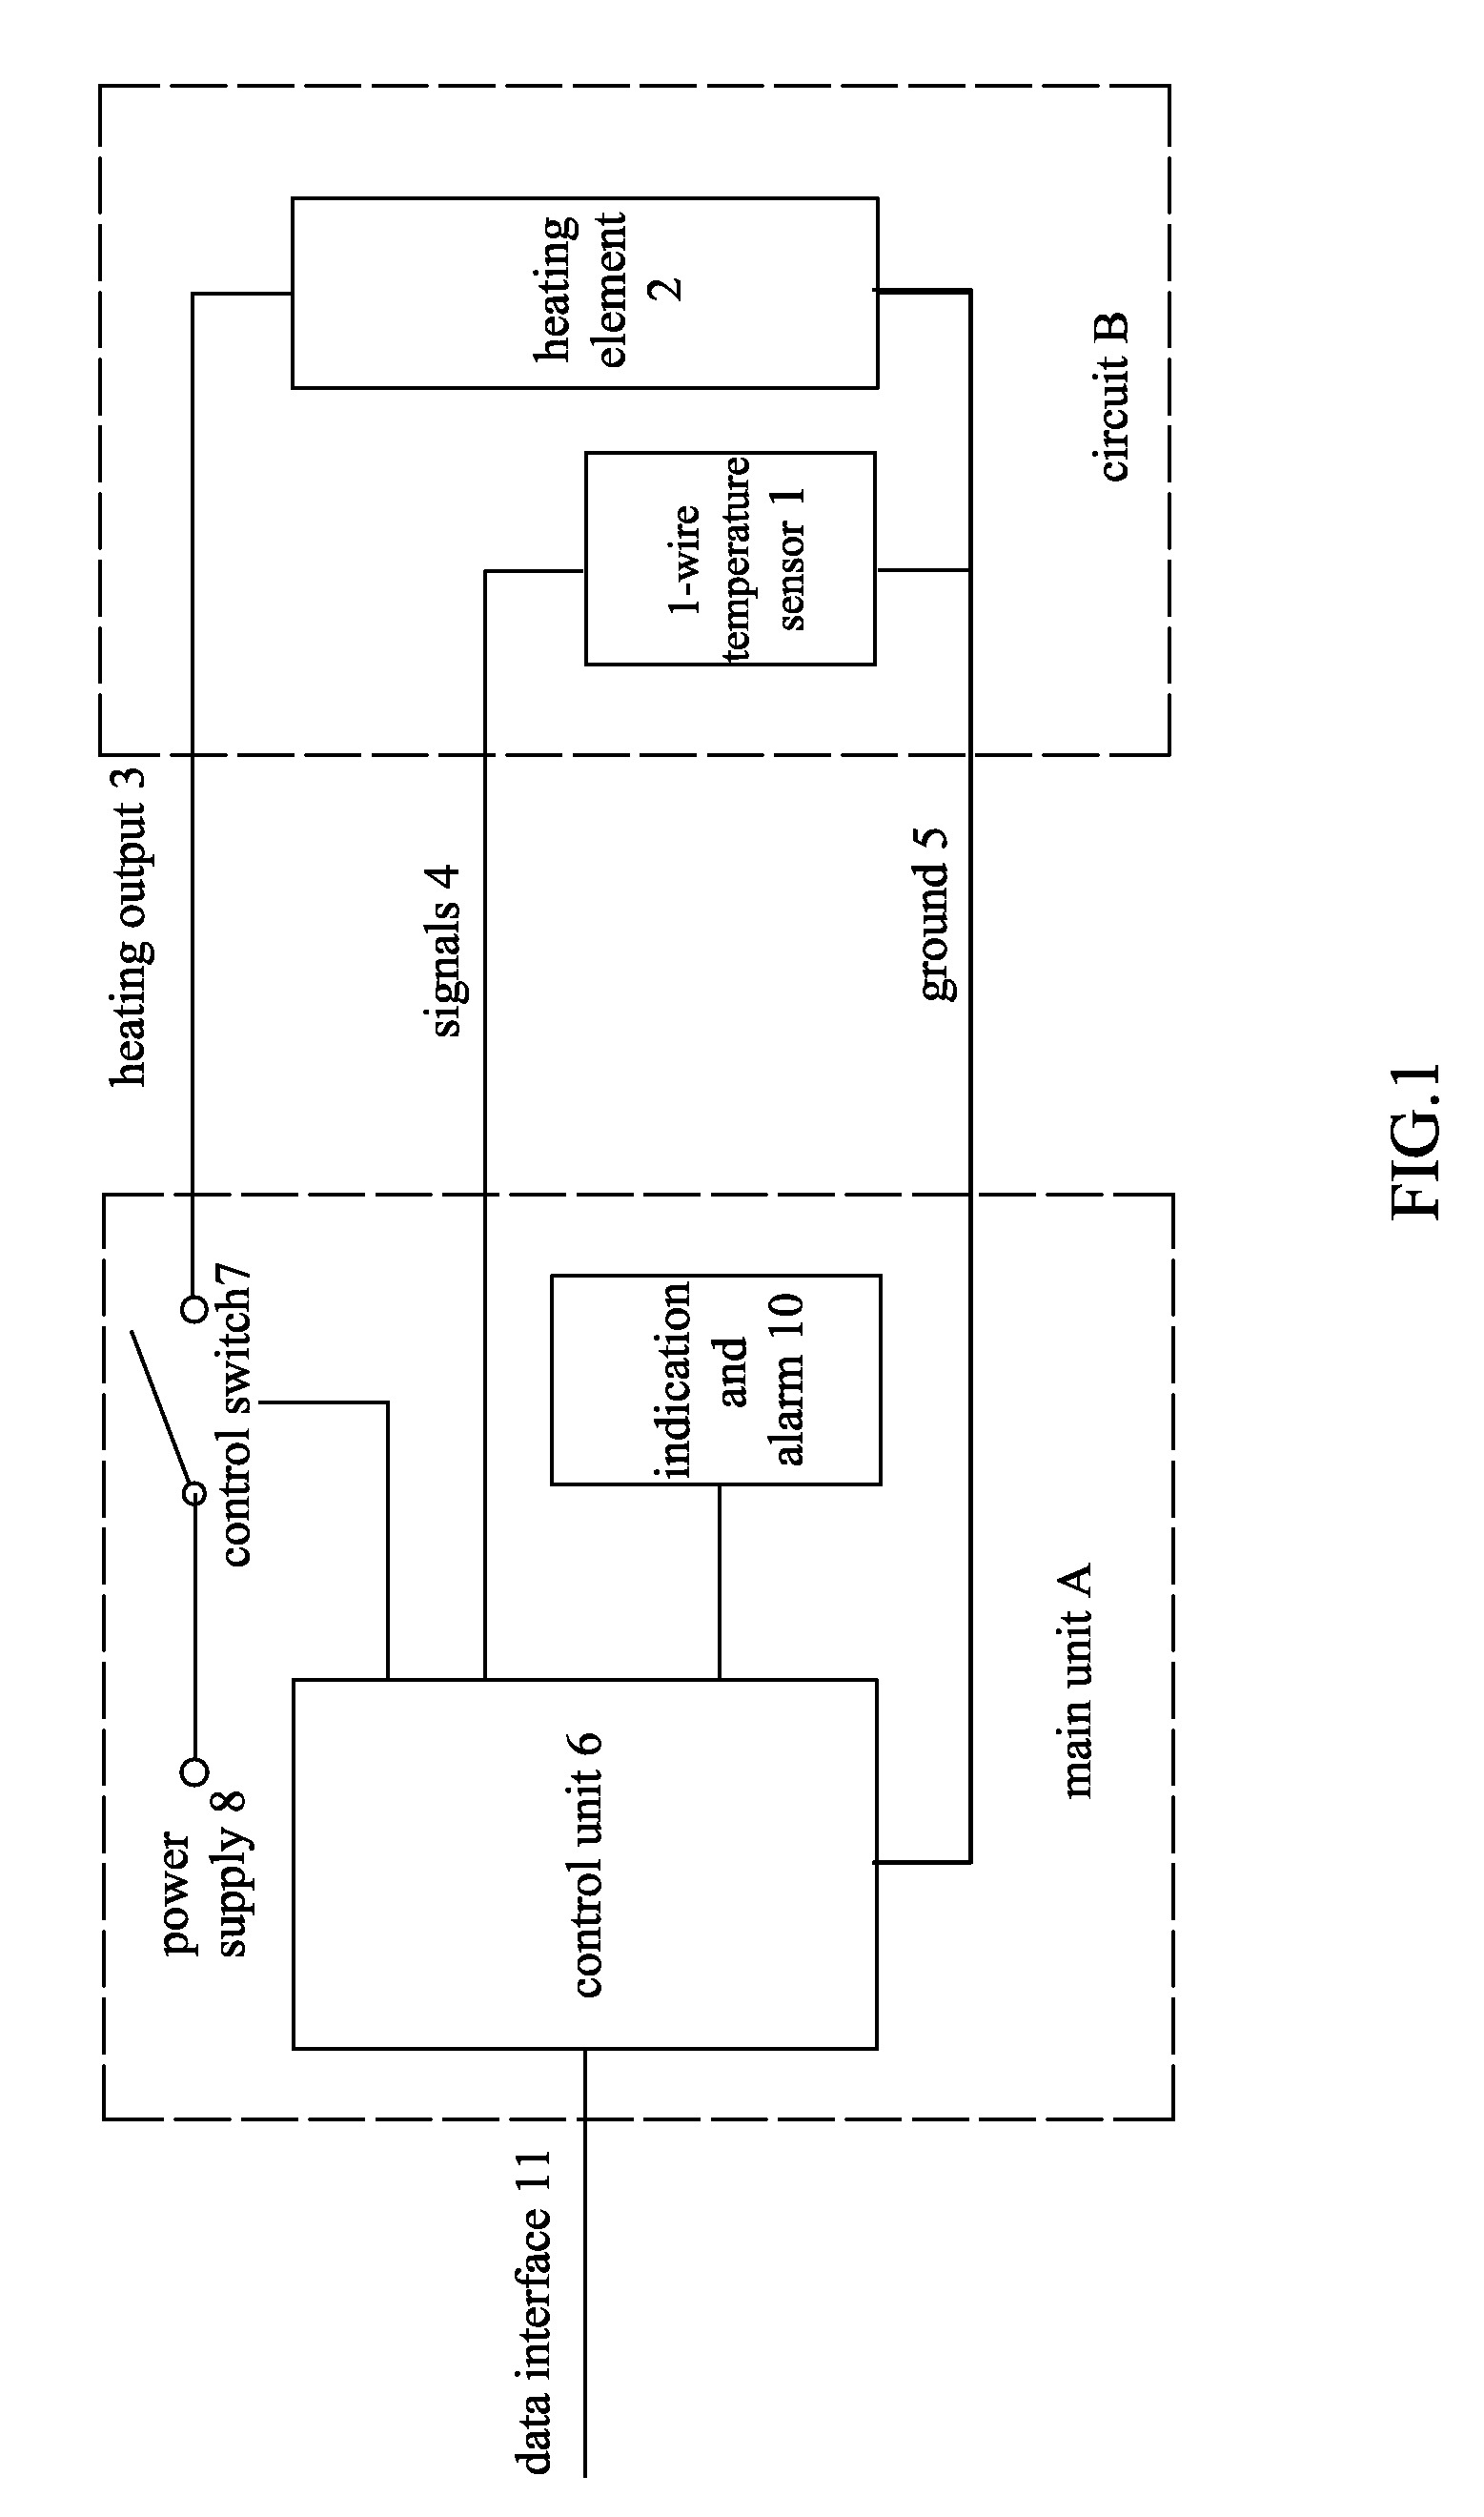 Method for improving the precision and reliability of circuit heating control through a 1 - wire sensor